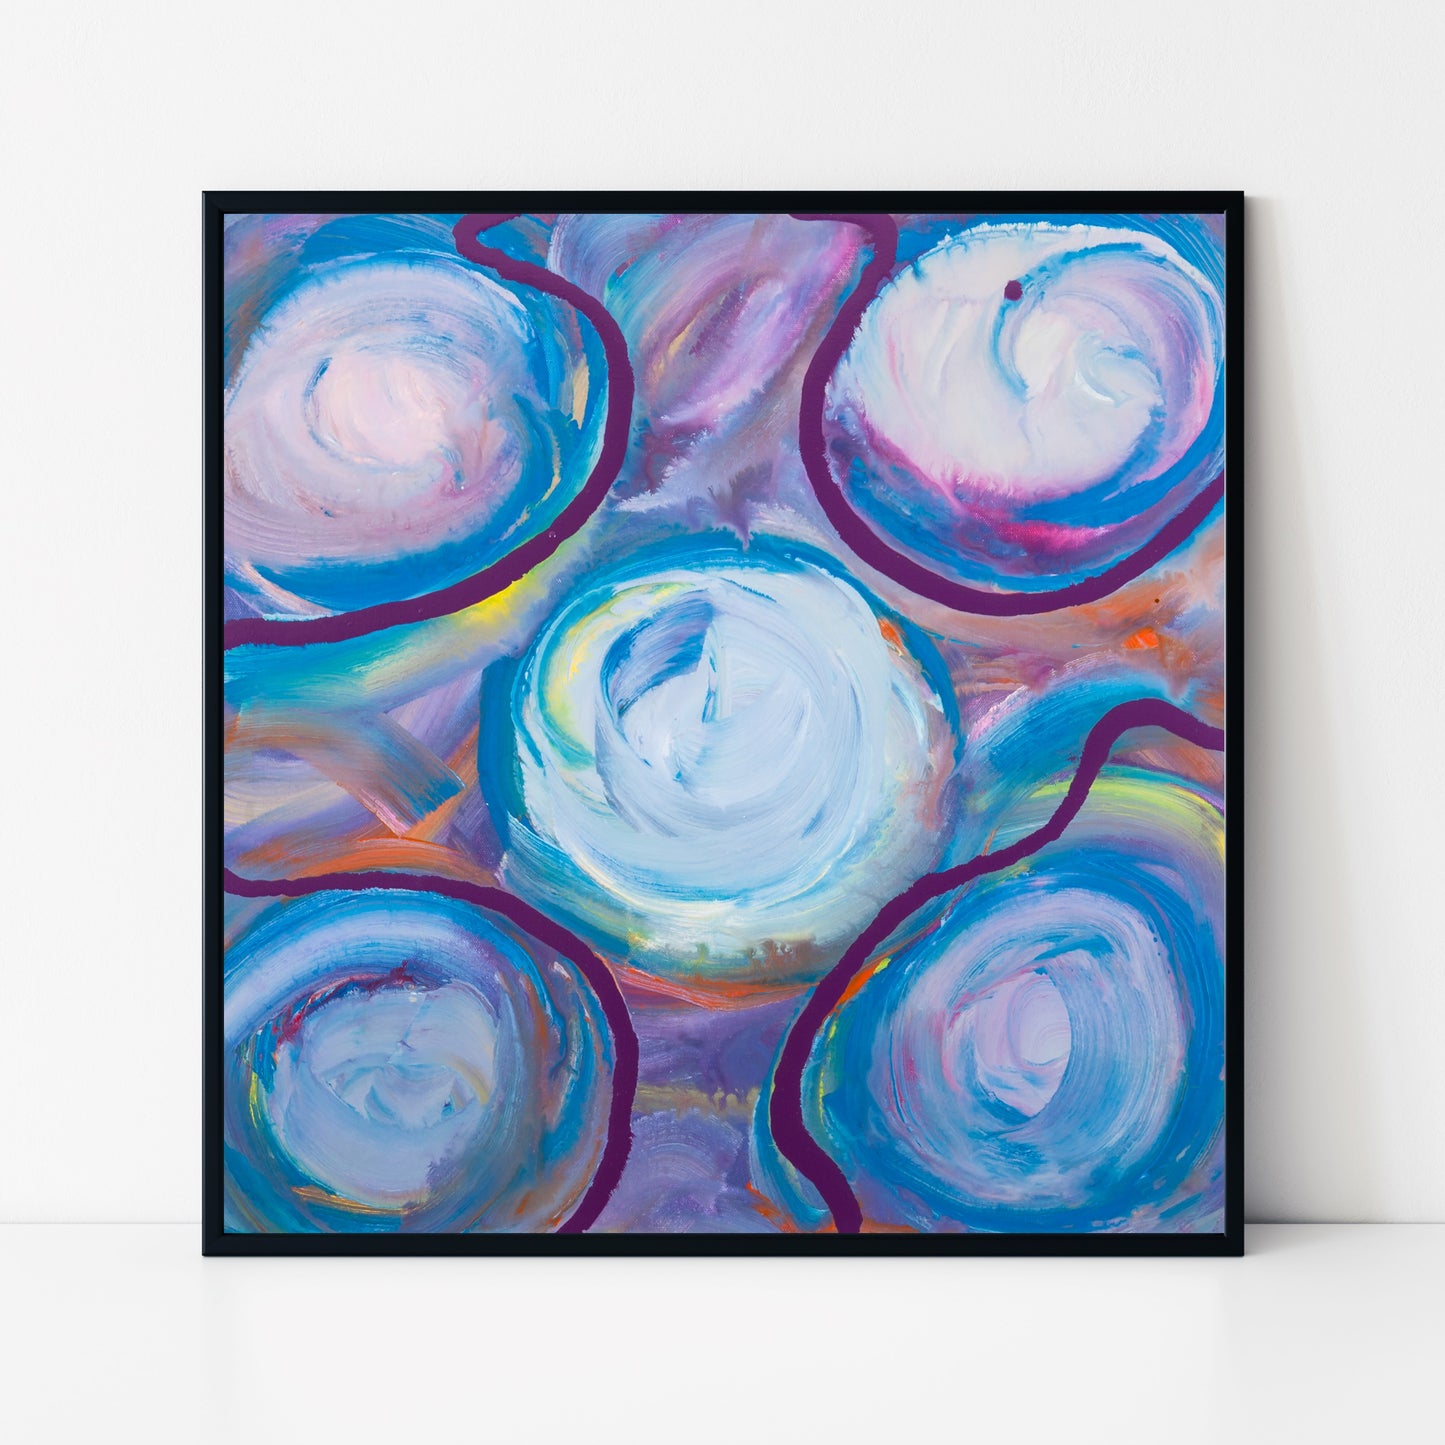 Bubbly Fantasies - Original Abstract Painting in Austin Texas 24" x 24"